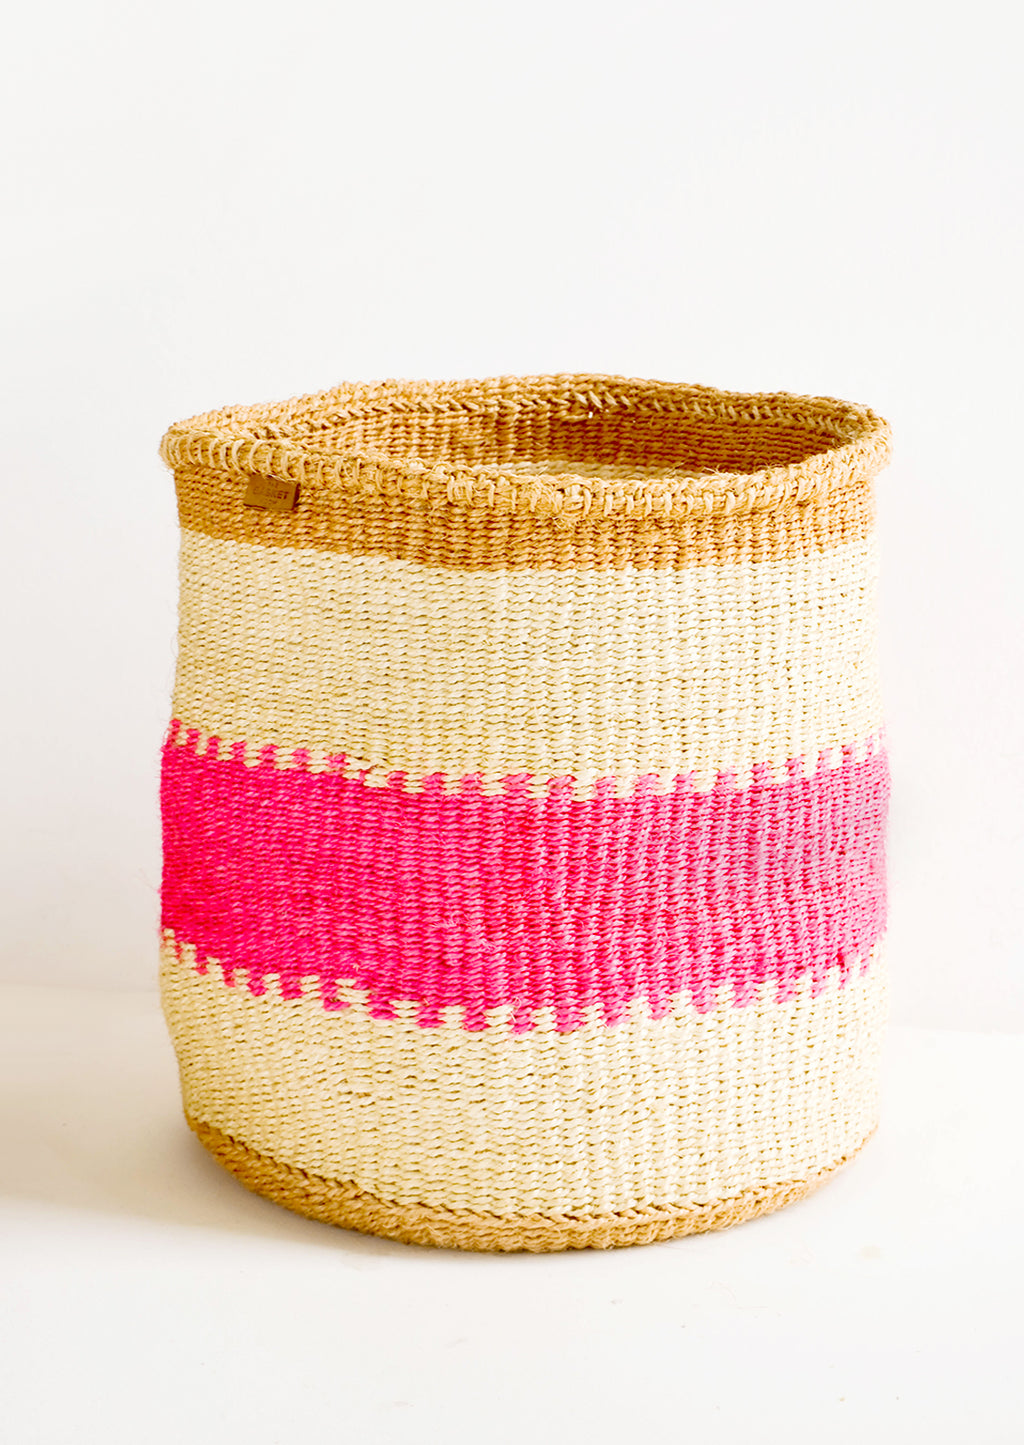 Large: Woven sisal basket in tan stripes with neon pink middle stripe